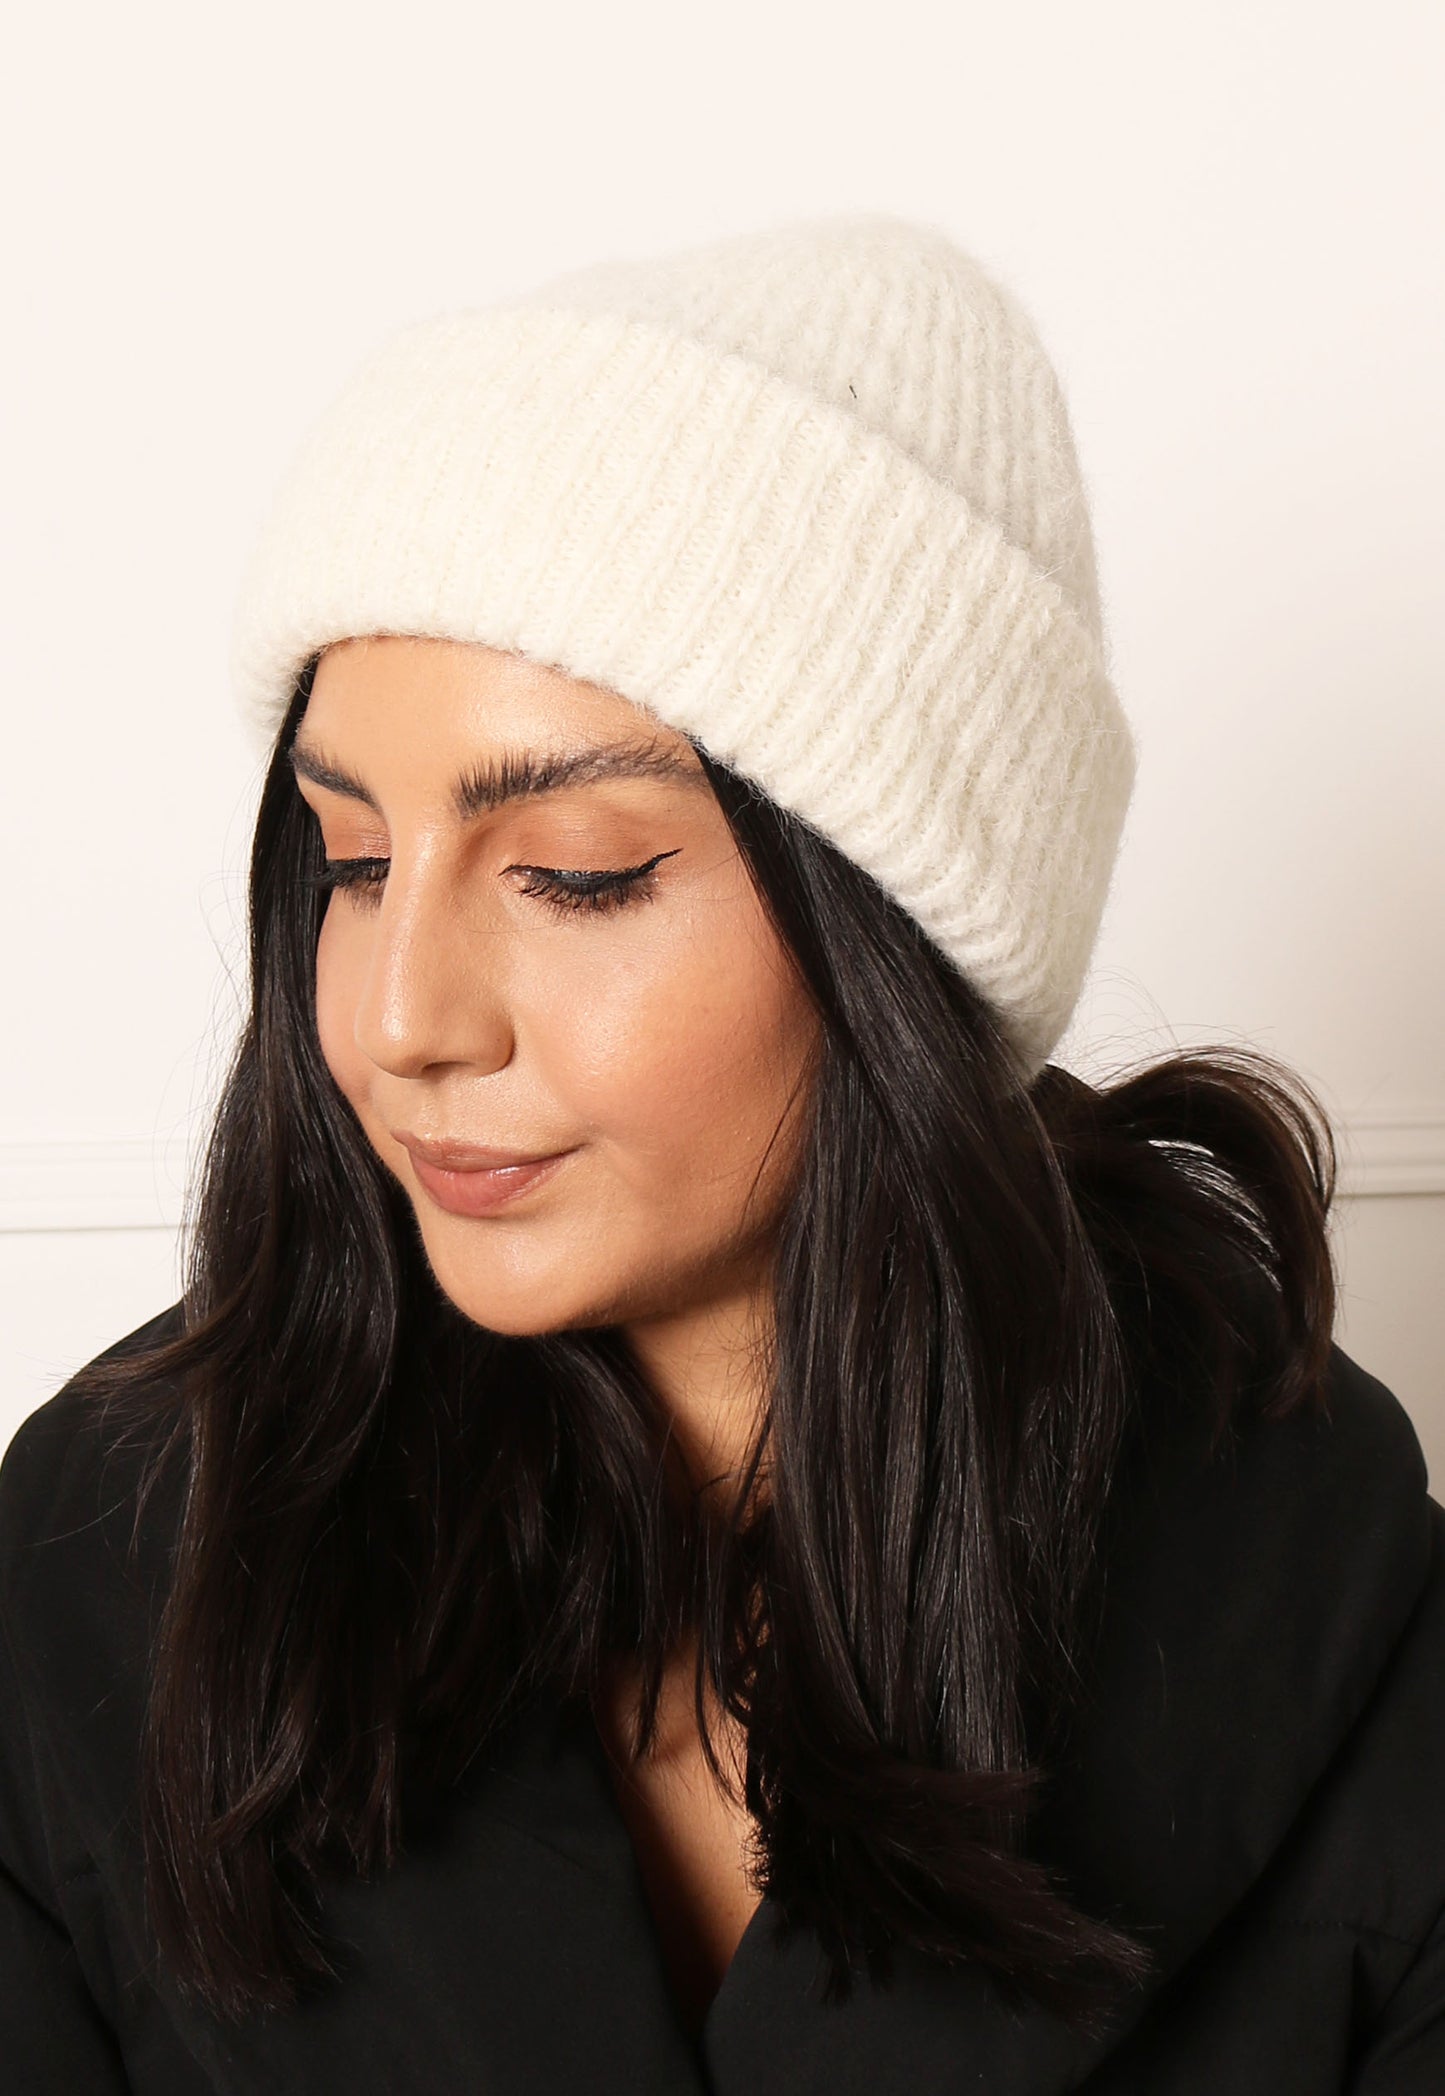 PIECES Fluffy Knit Ribbed Turn Up Beanie Hat in Soft Cream - concretebartops